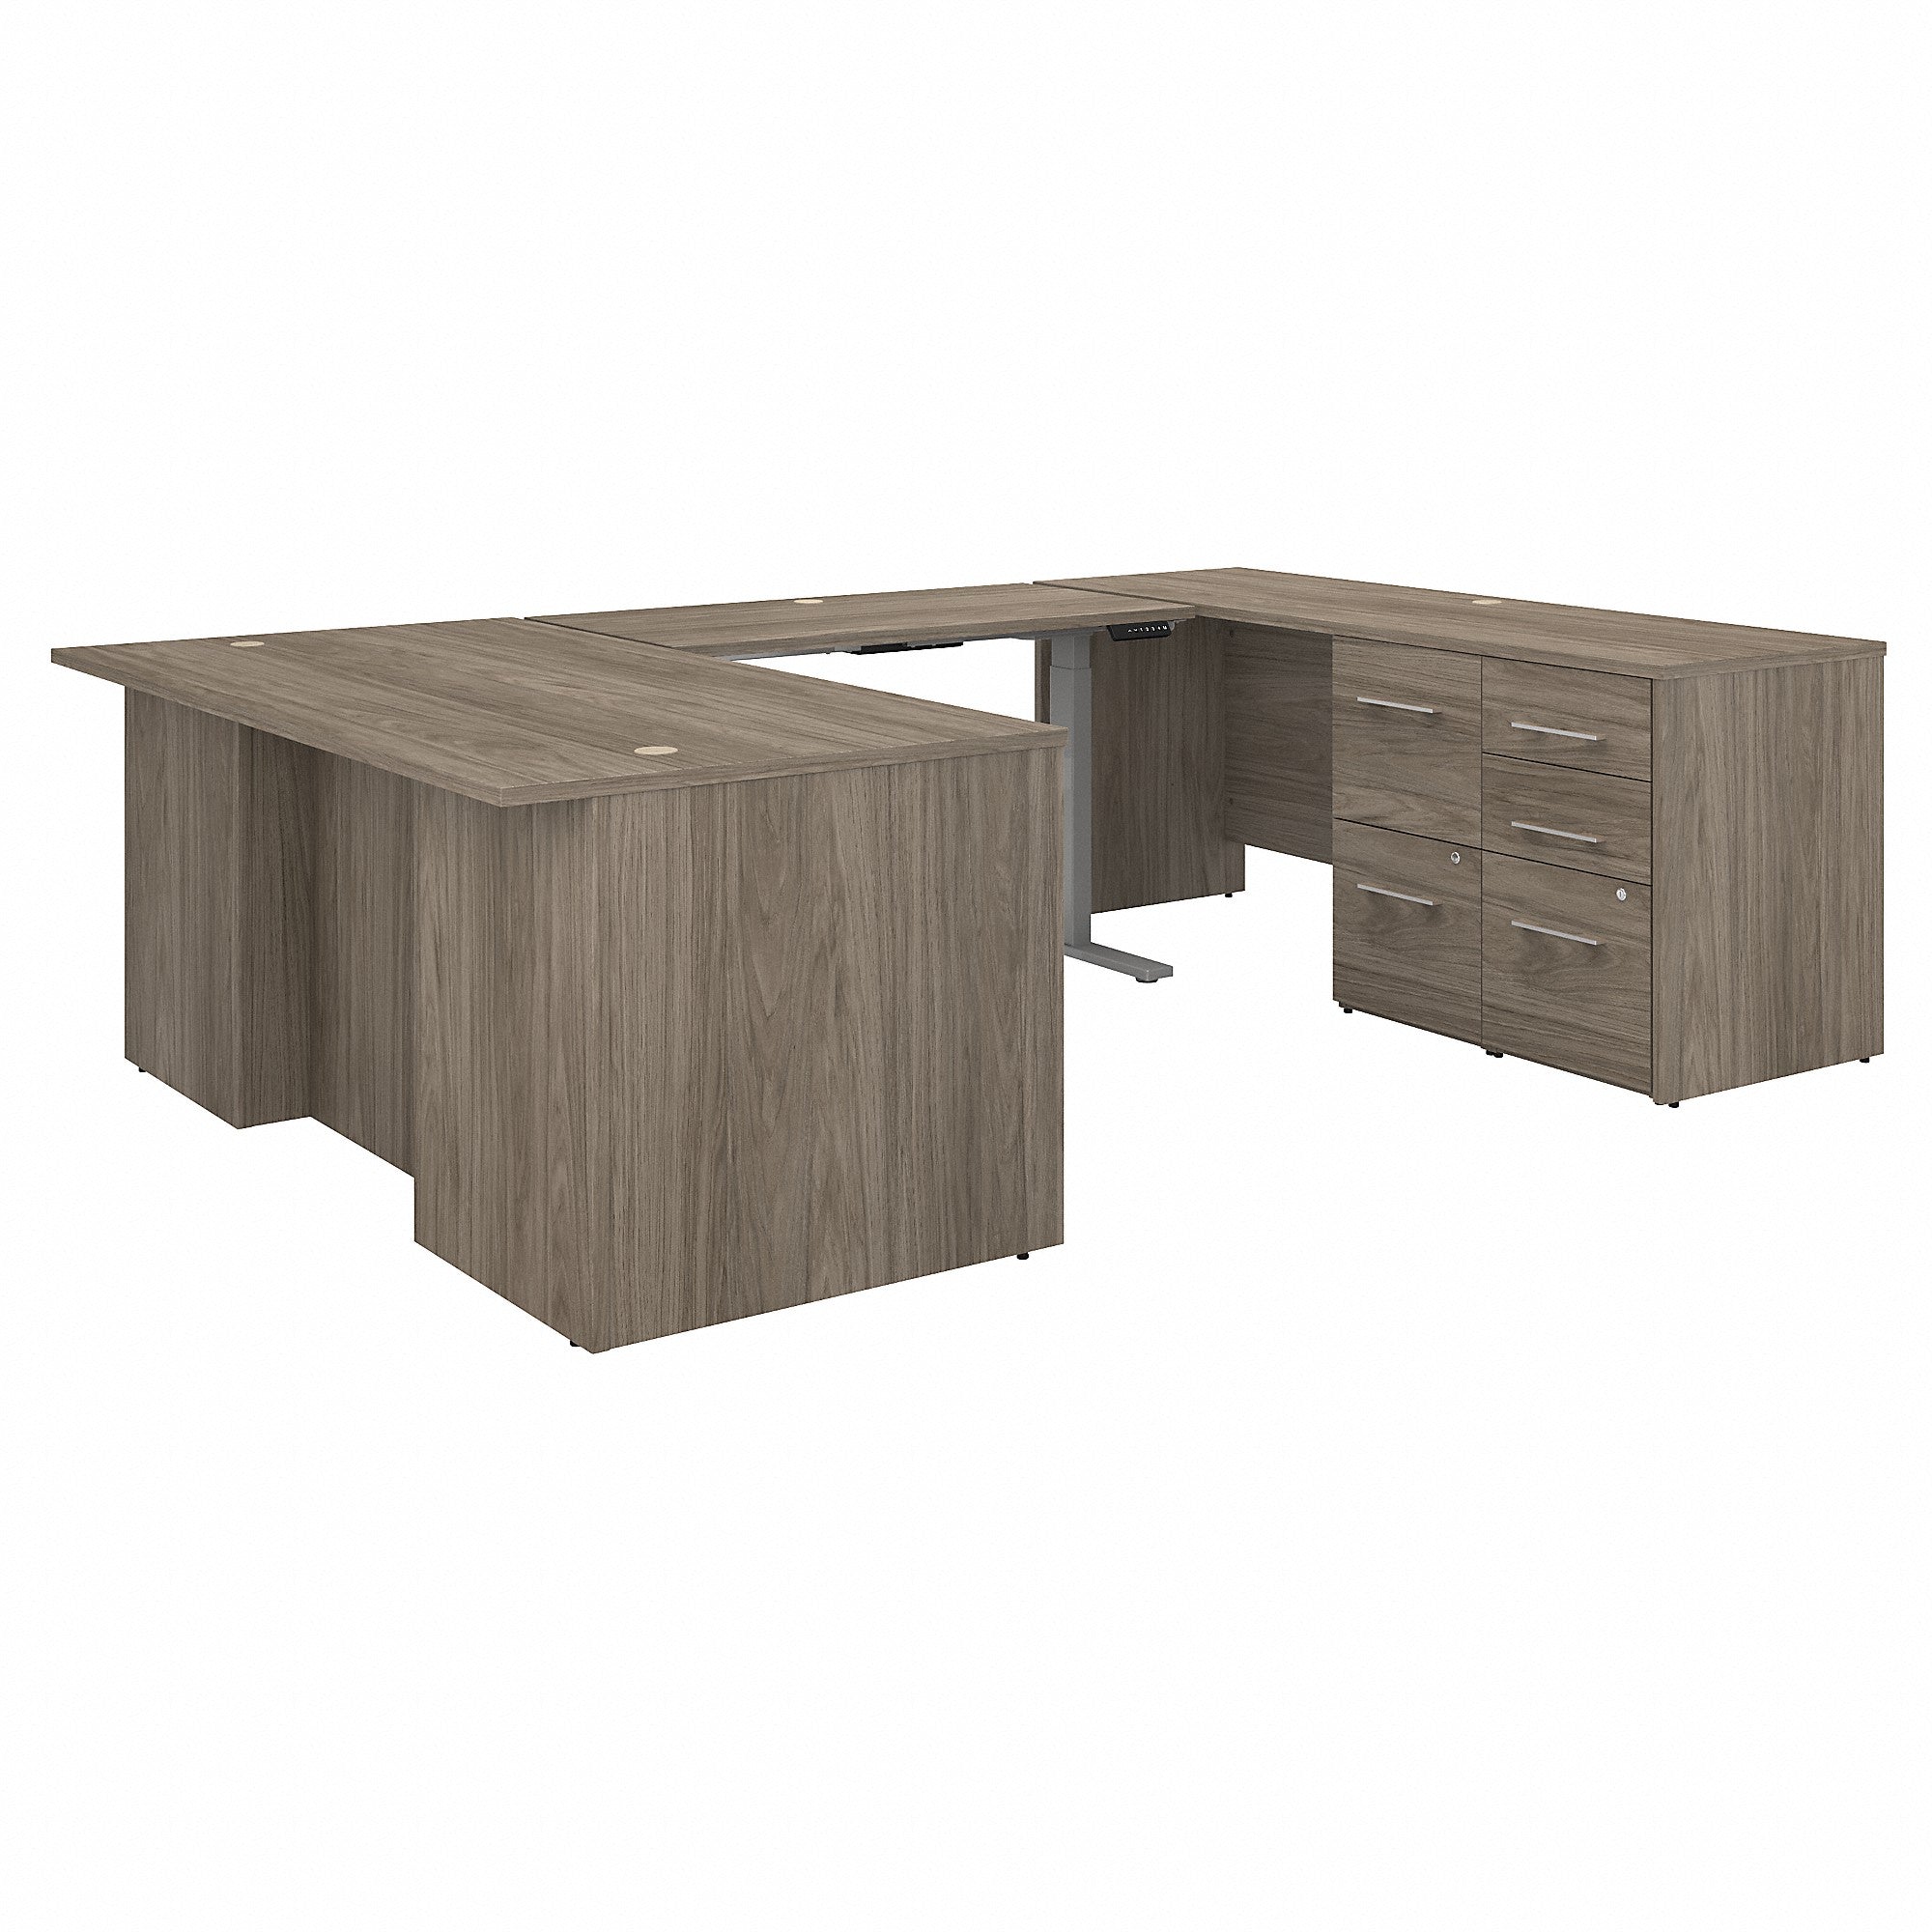 Bush Business Furniture Office 500 72W Height Adjustable U Shaped Executive Desk with Drawers | Modern Hickory